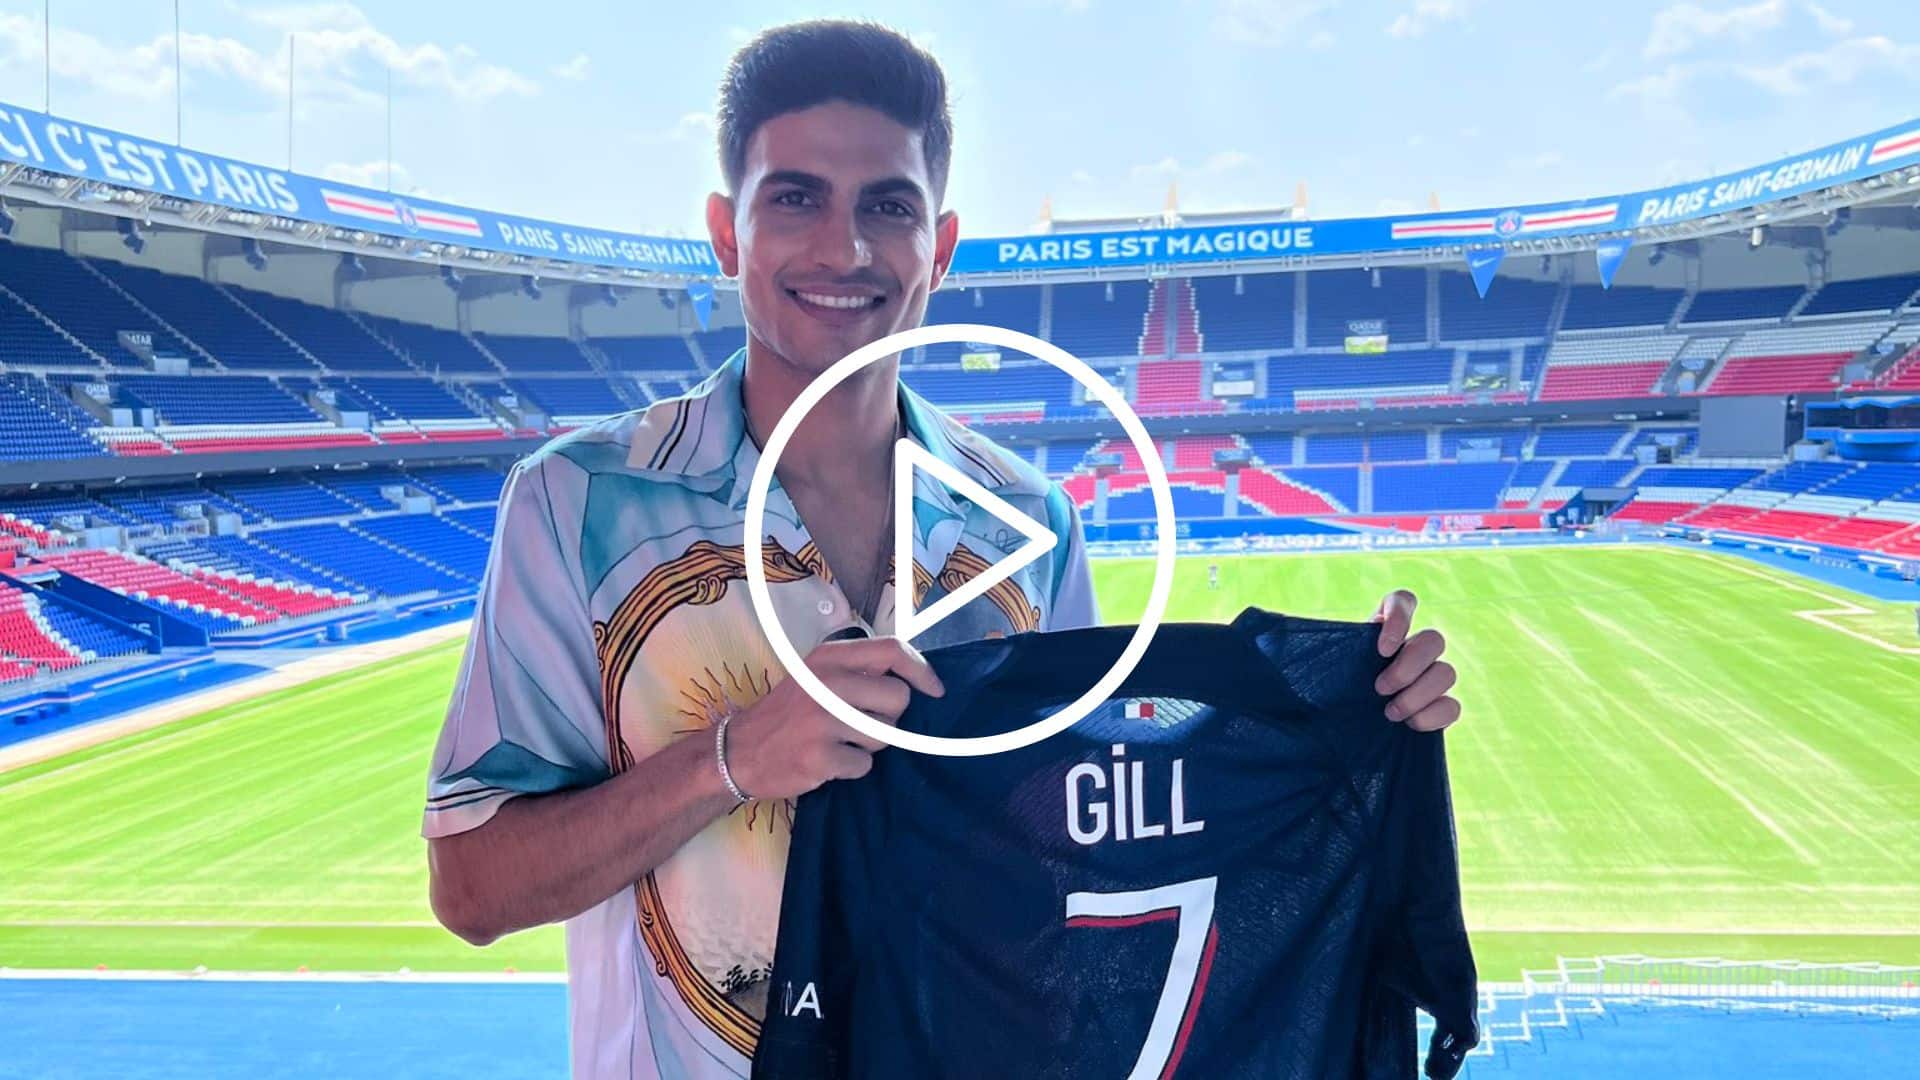 [WATCH] Shubman Gill Receives Personalized PSG Jersey No. 7 On His Visit To Parc des Princes